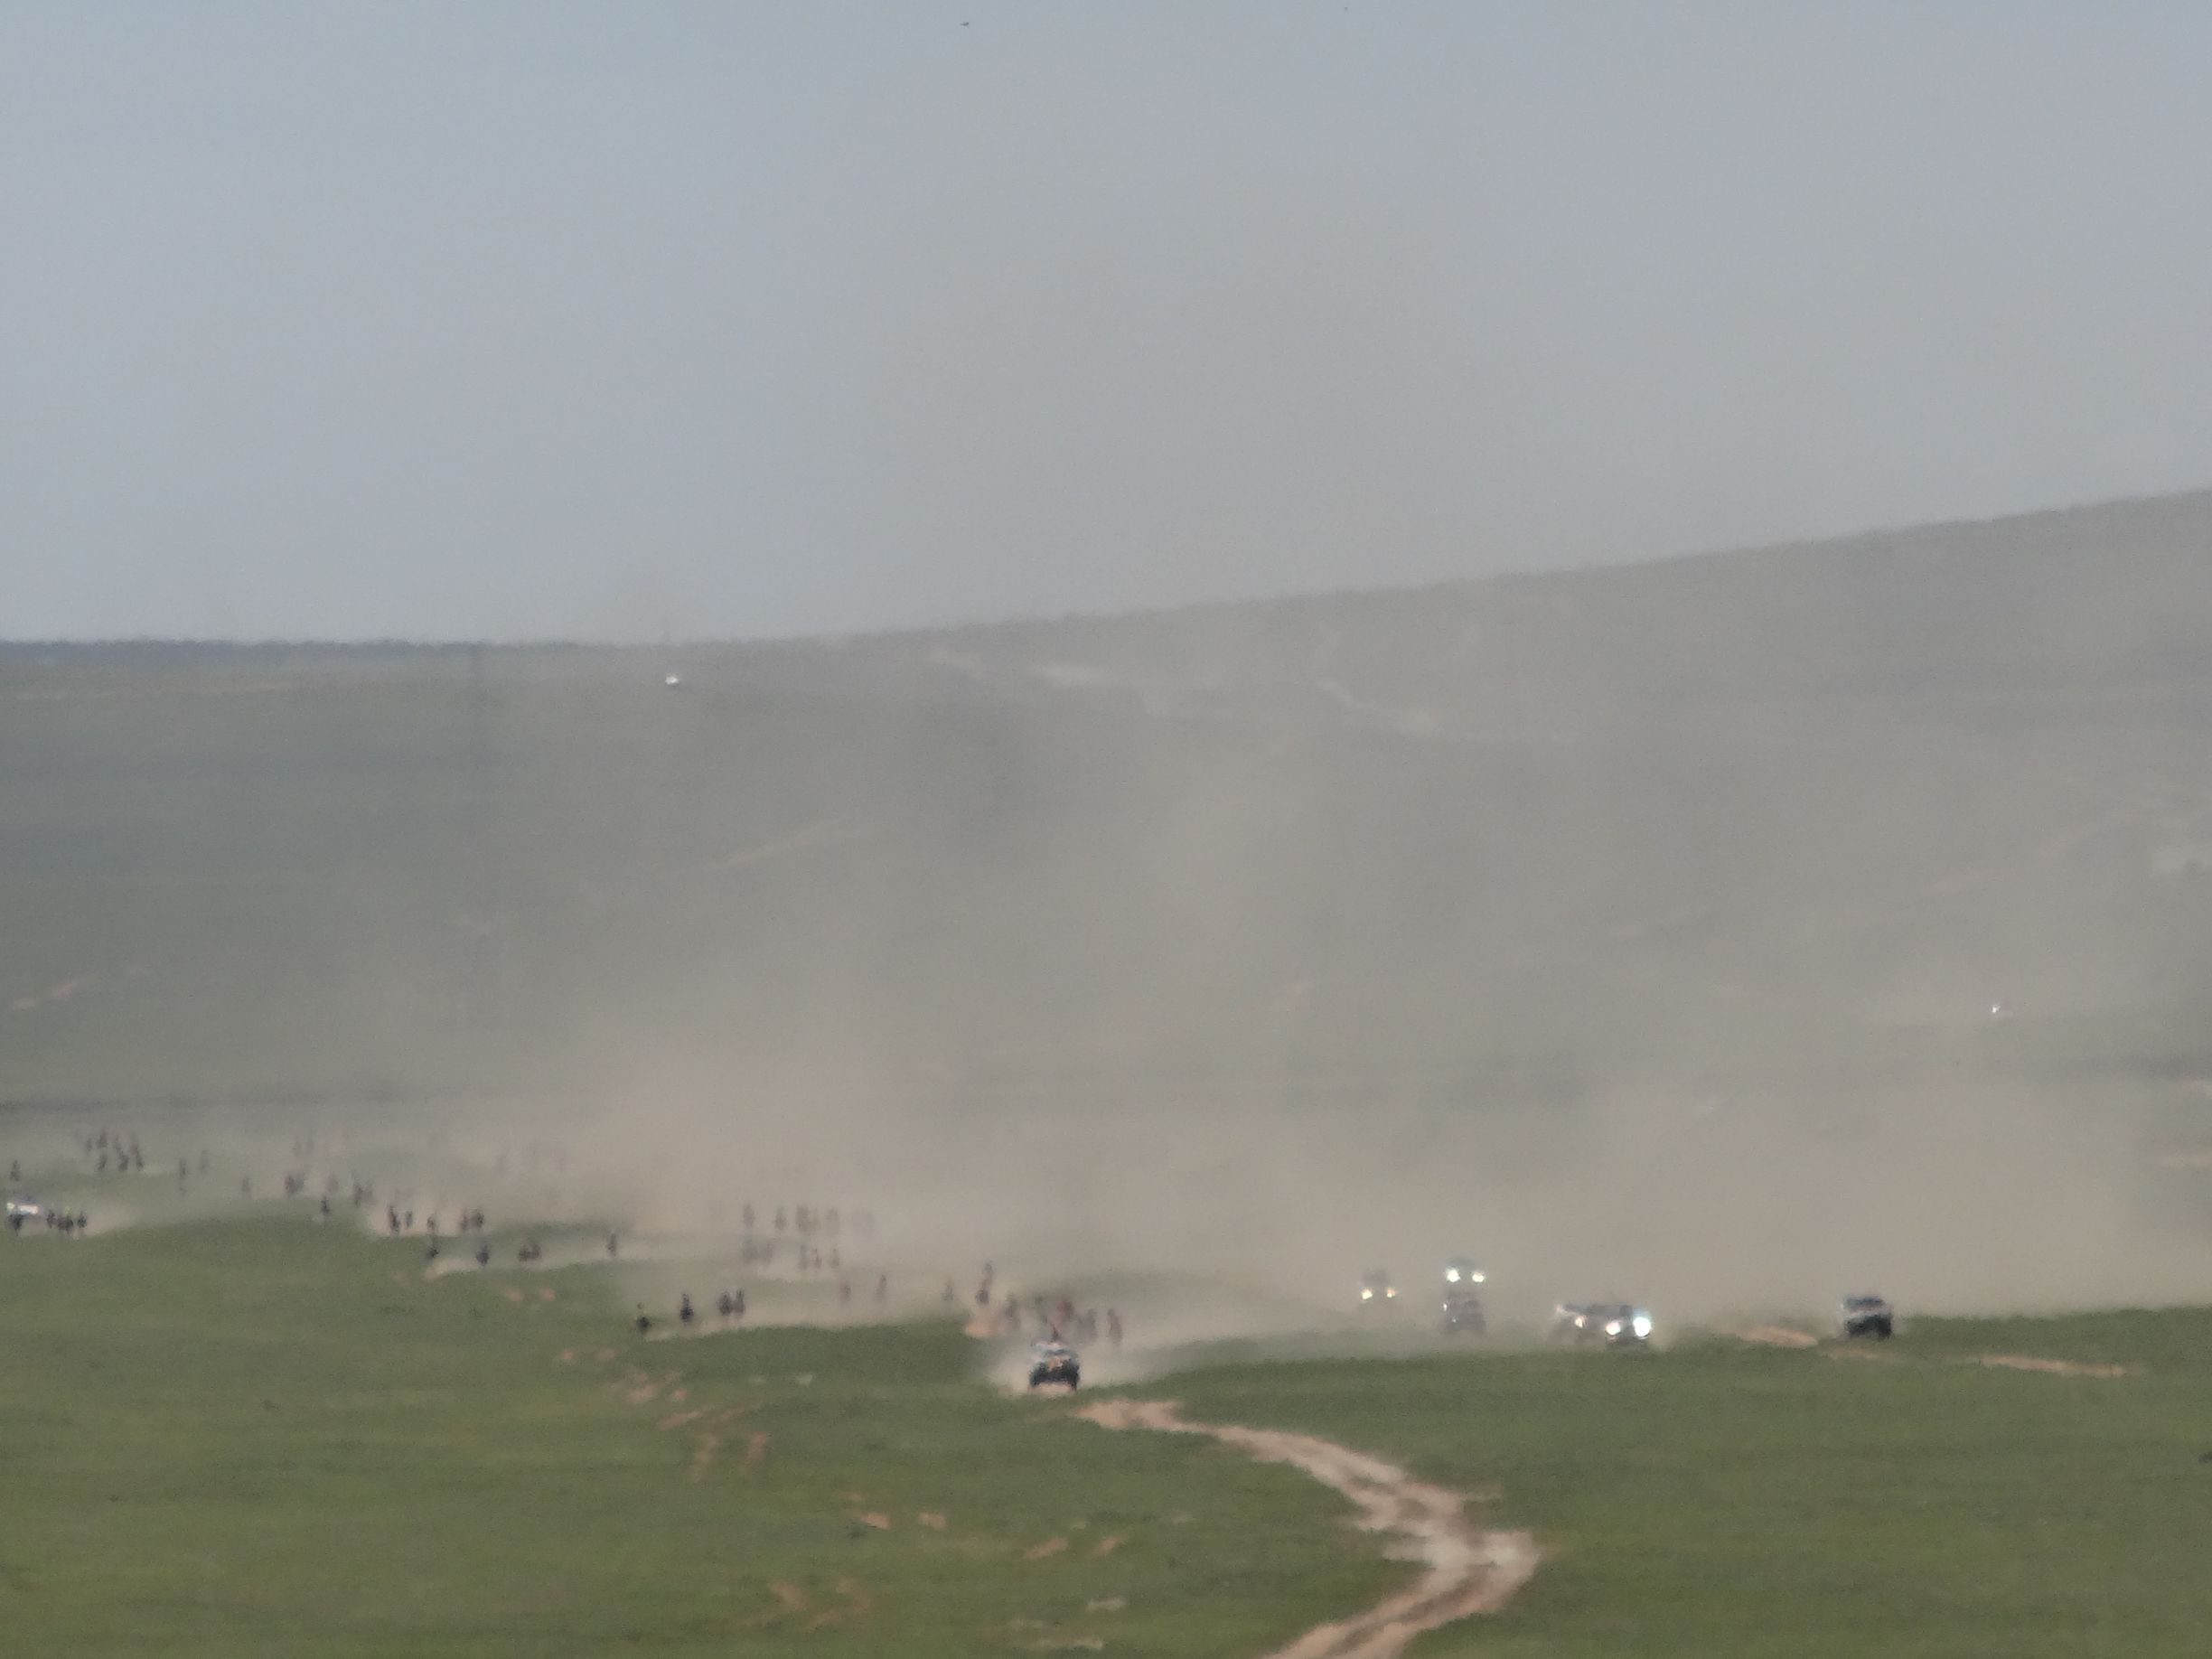 a little closer and the cloud of dust reveals horses and 4WDs 